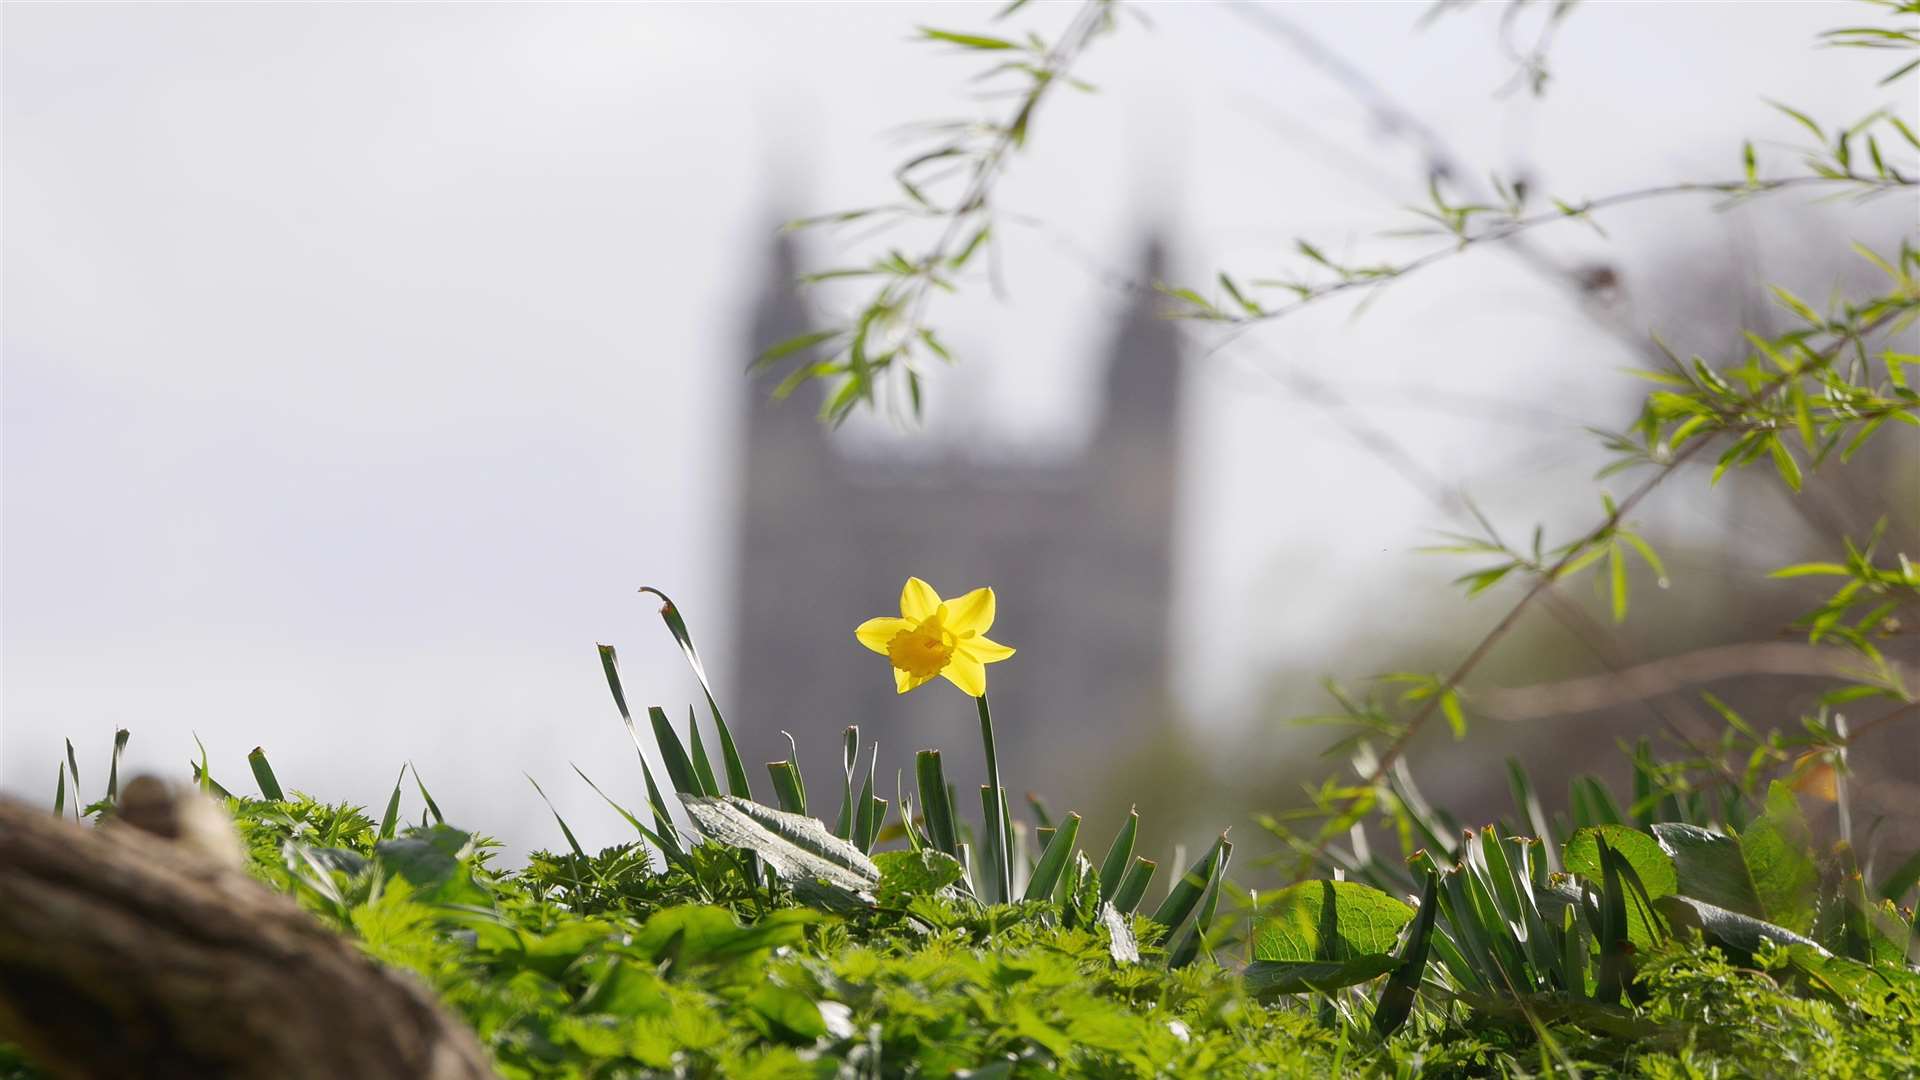 Simon Pettman captures the early signs of spring as this daffodil rises up against the backdrop of the Cathedral